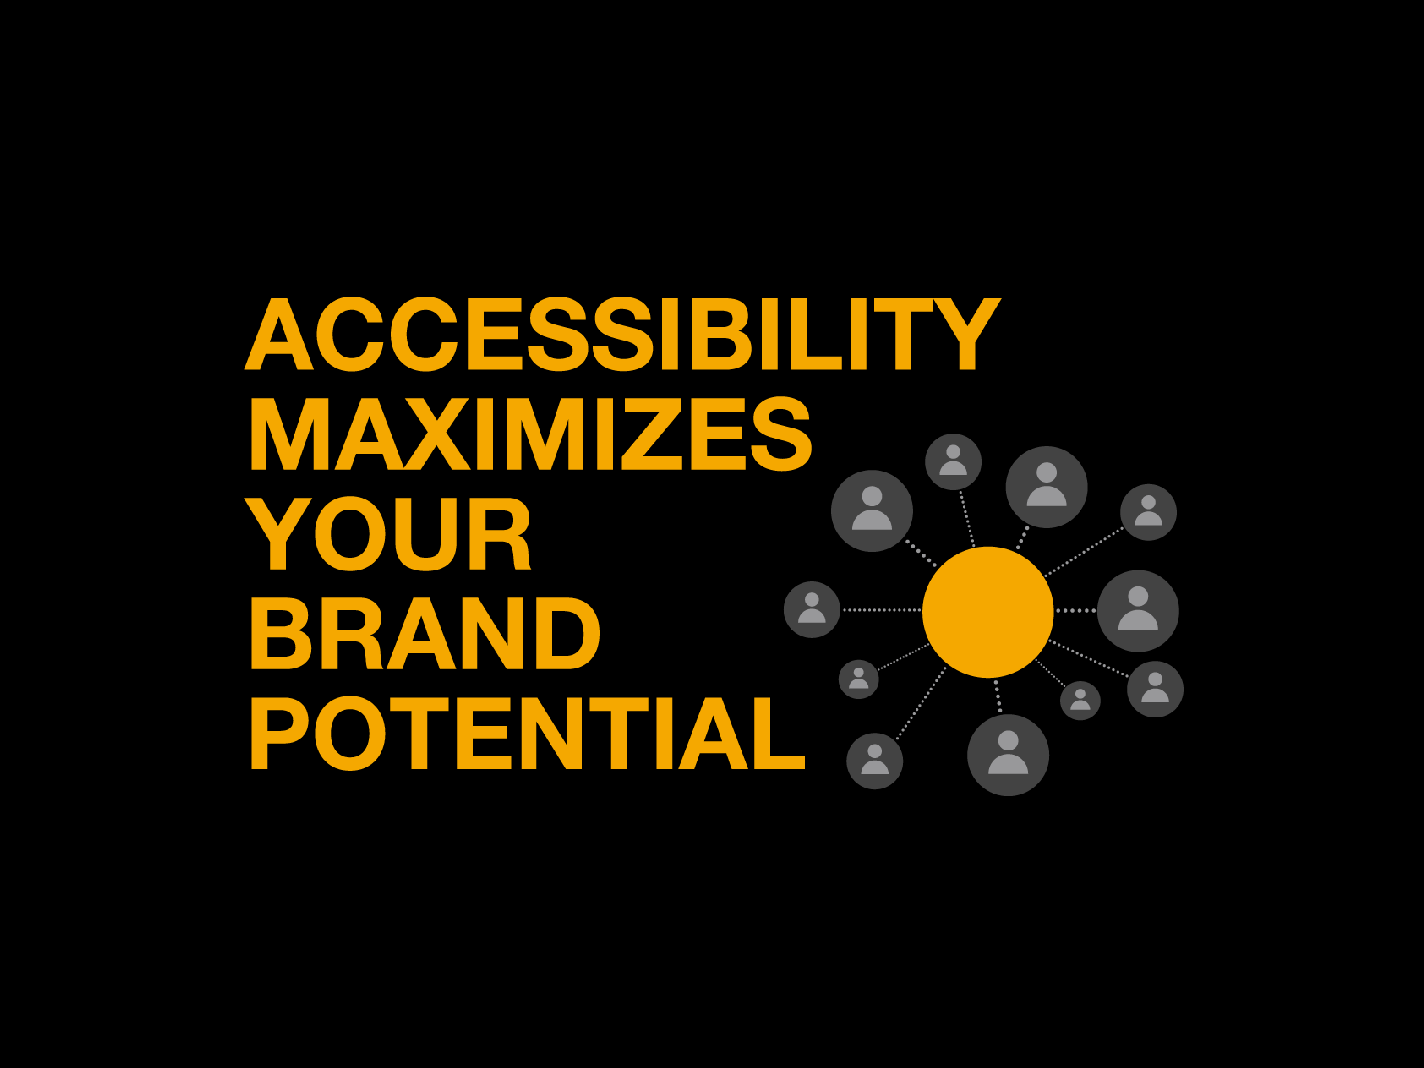 Accessibility maximizes your brand potential